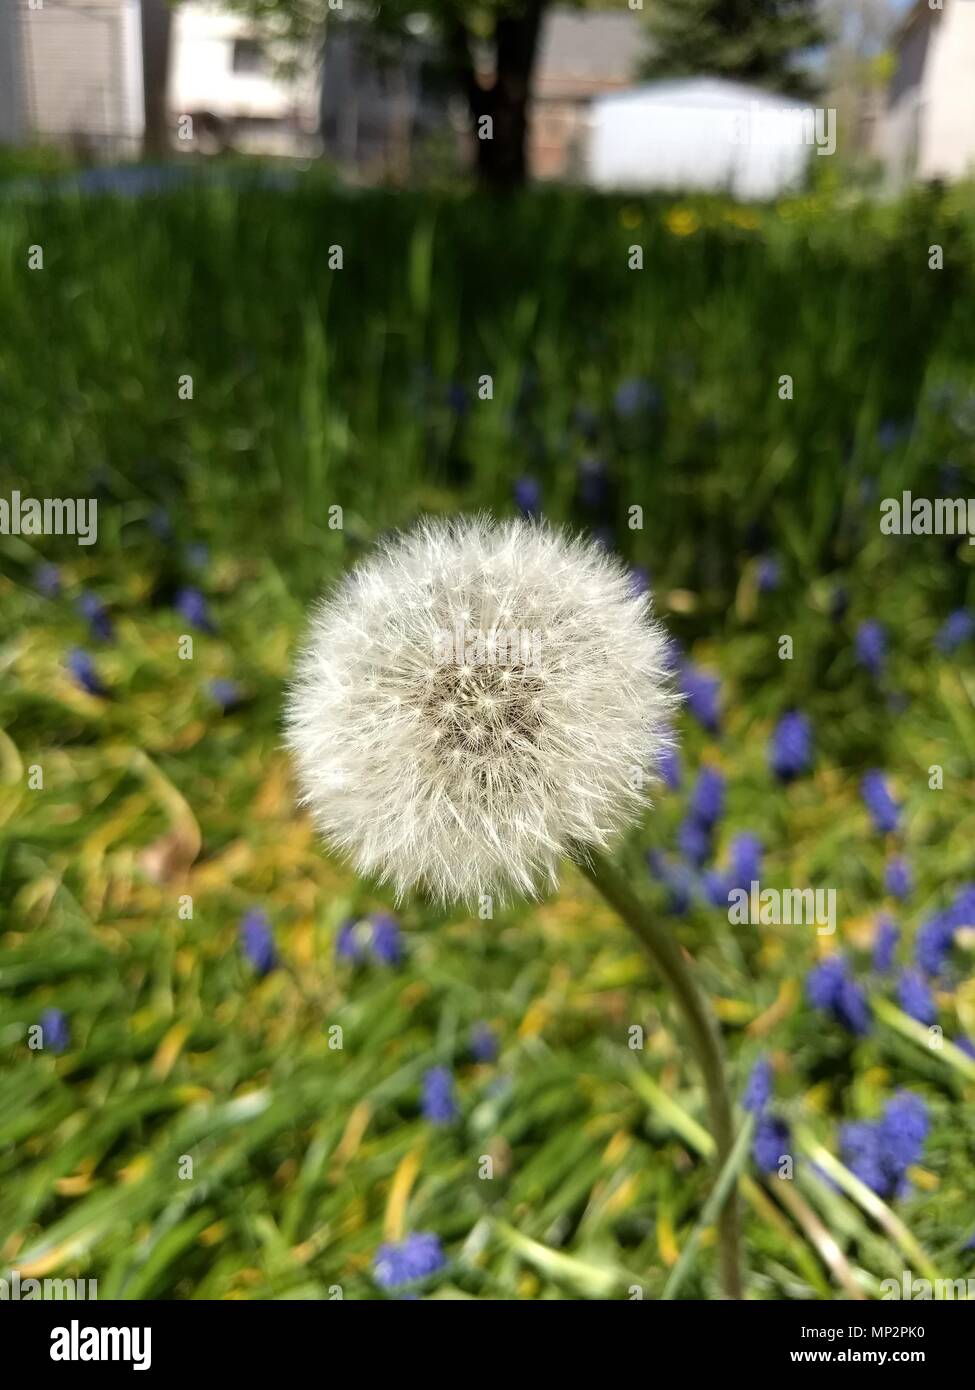 Spring Dandelion Blossom Gone to Seed in Blurred Field of Hyacinth Background Stock Photo